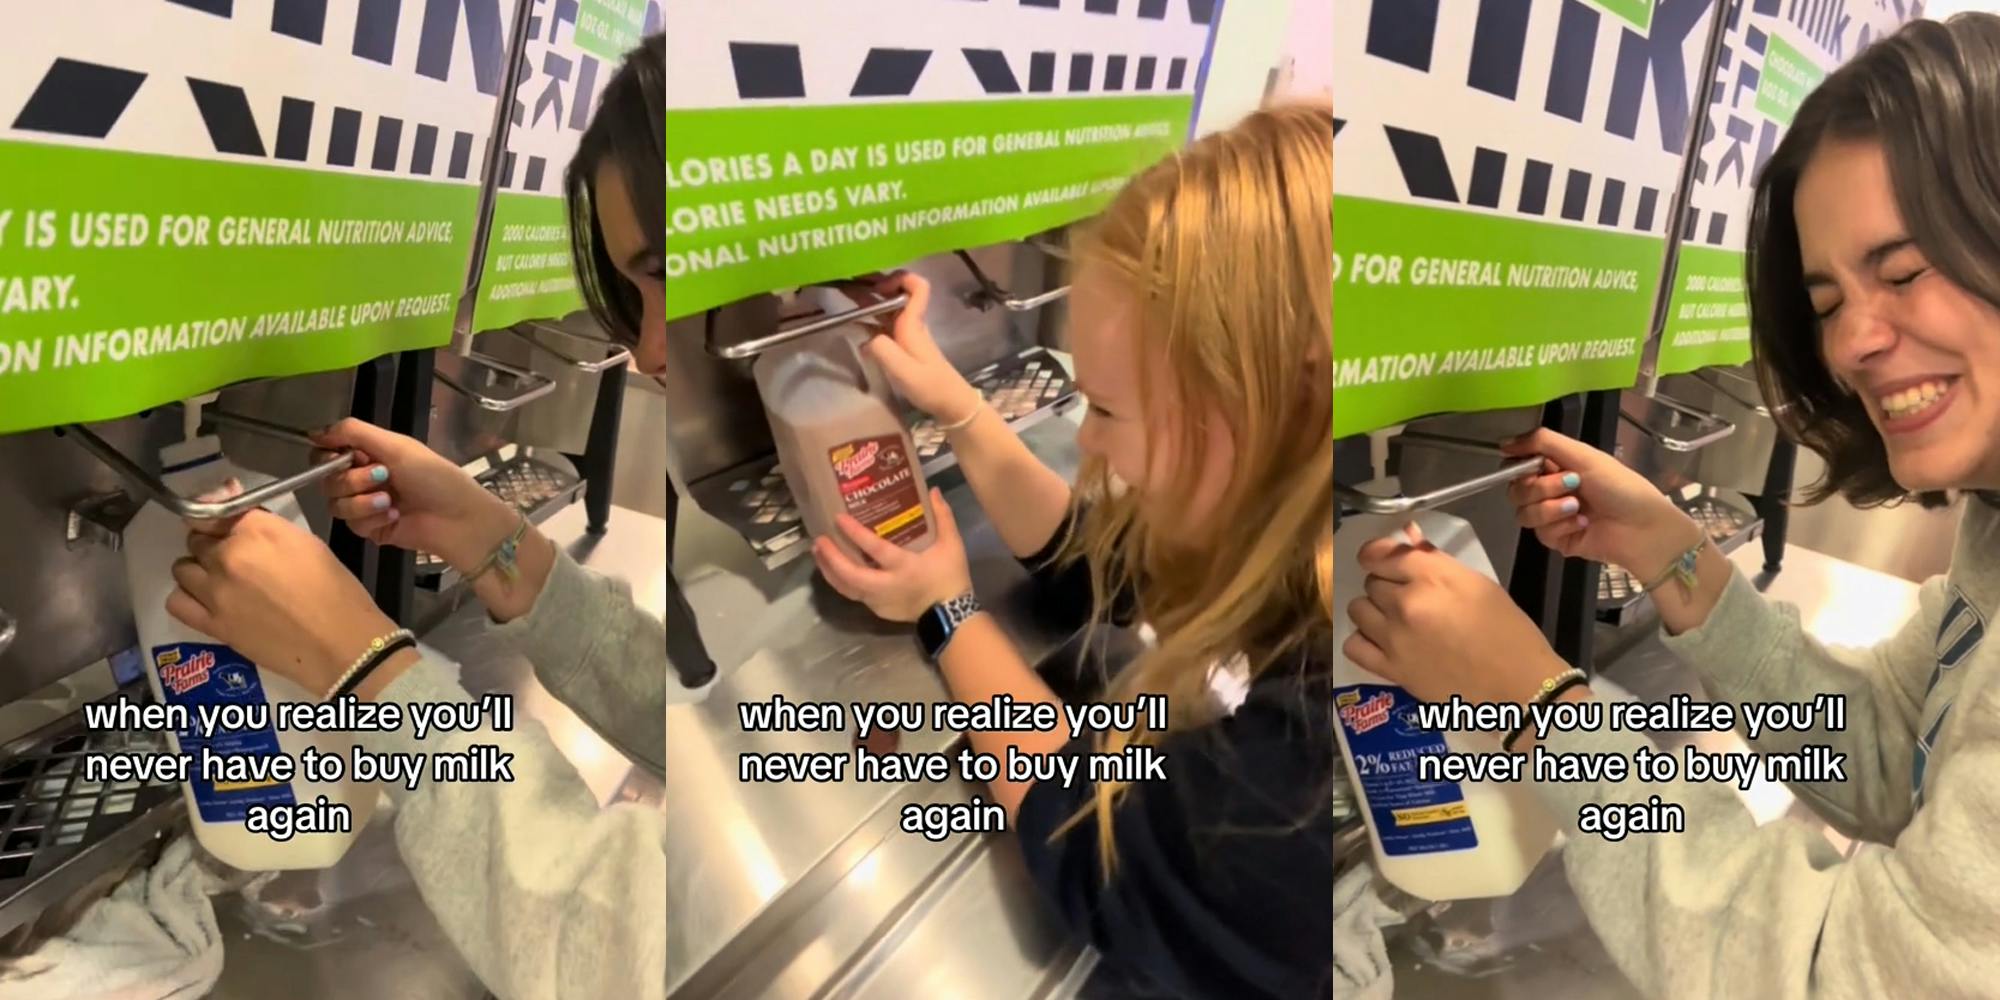 college student filling milk jug with caption "when you realize you'll never have to buy milk again" (l) college student filling milk jug with caption "when you realize you'll never have to buy milk again" (c) college student filling milk jug with caption "when you realize you'll never have to buy milk again" (r)